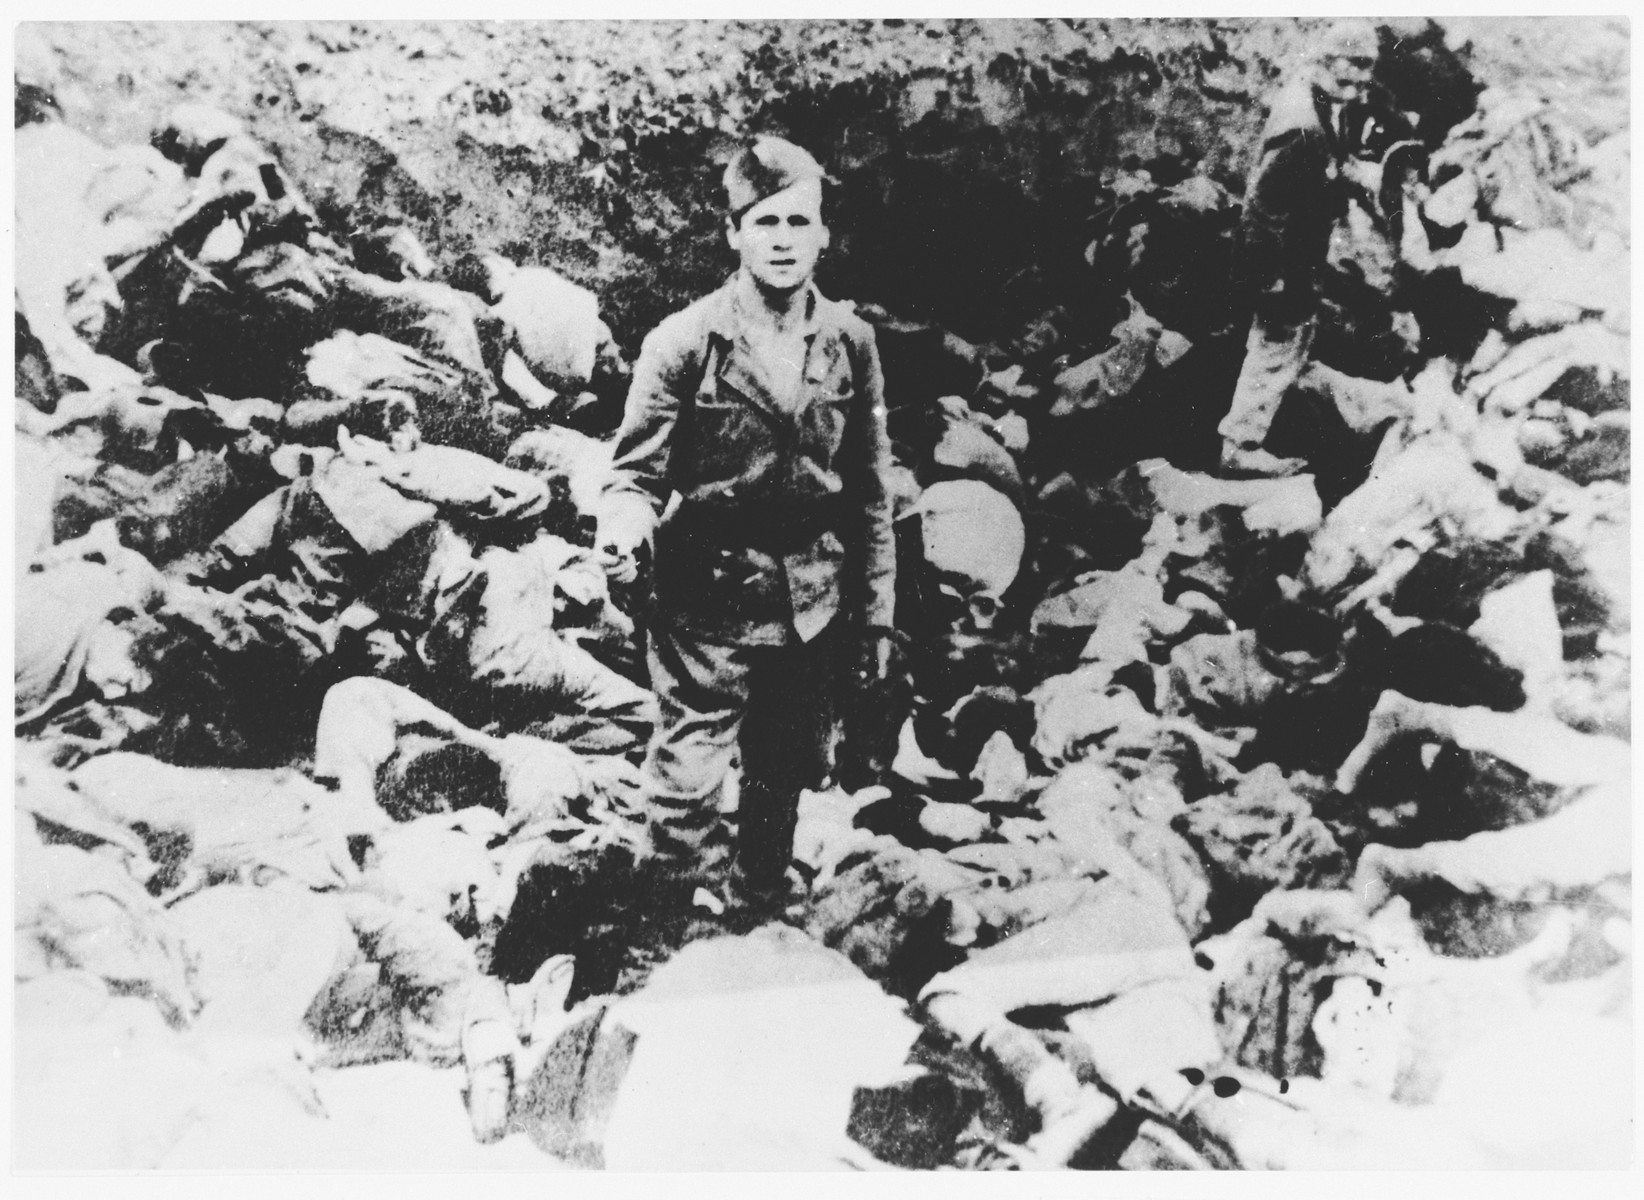 An Ustasa guard stands among the bodies of prisoners murdered in the Jasenovac concentration camp.